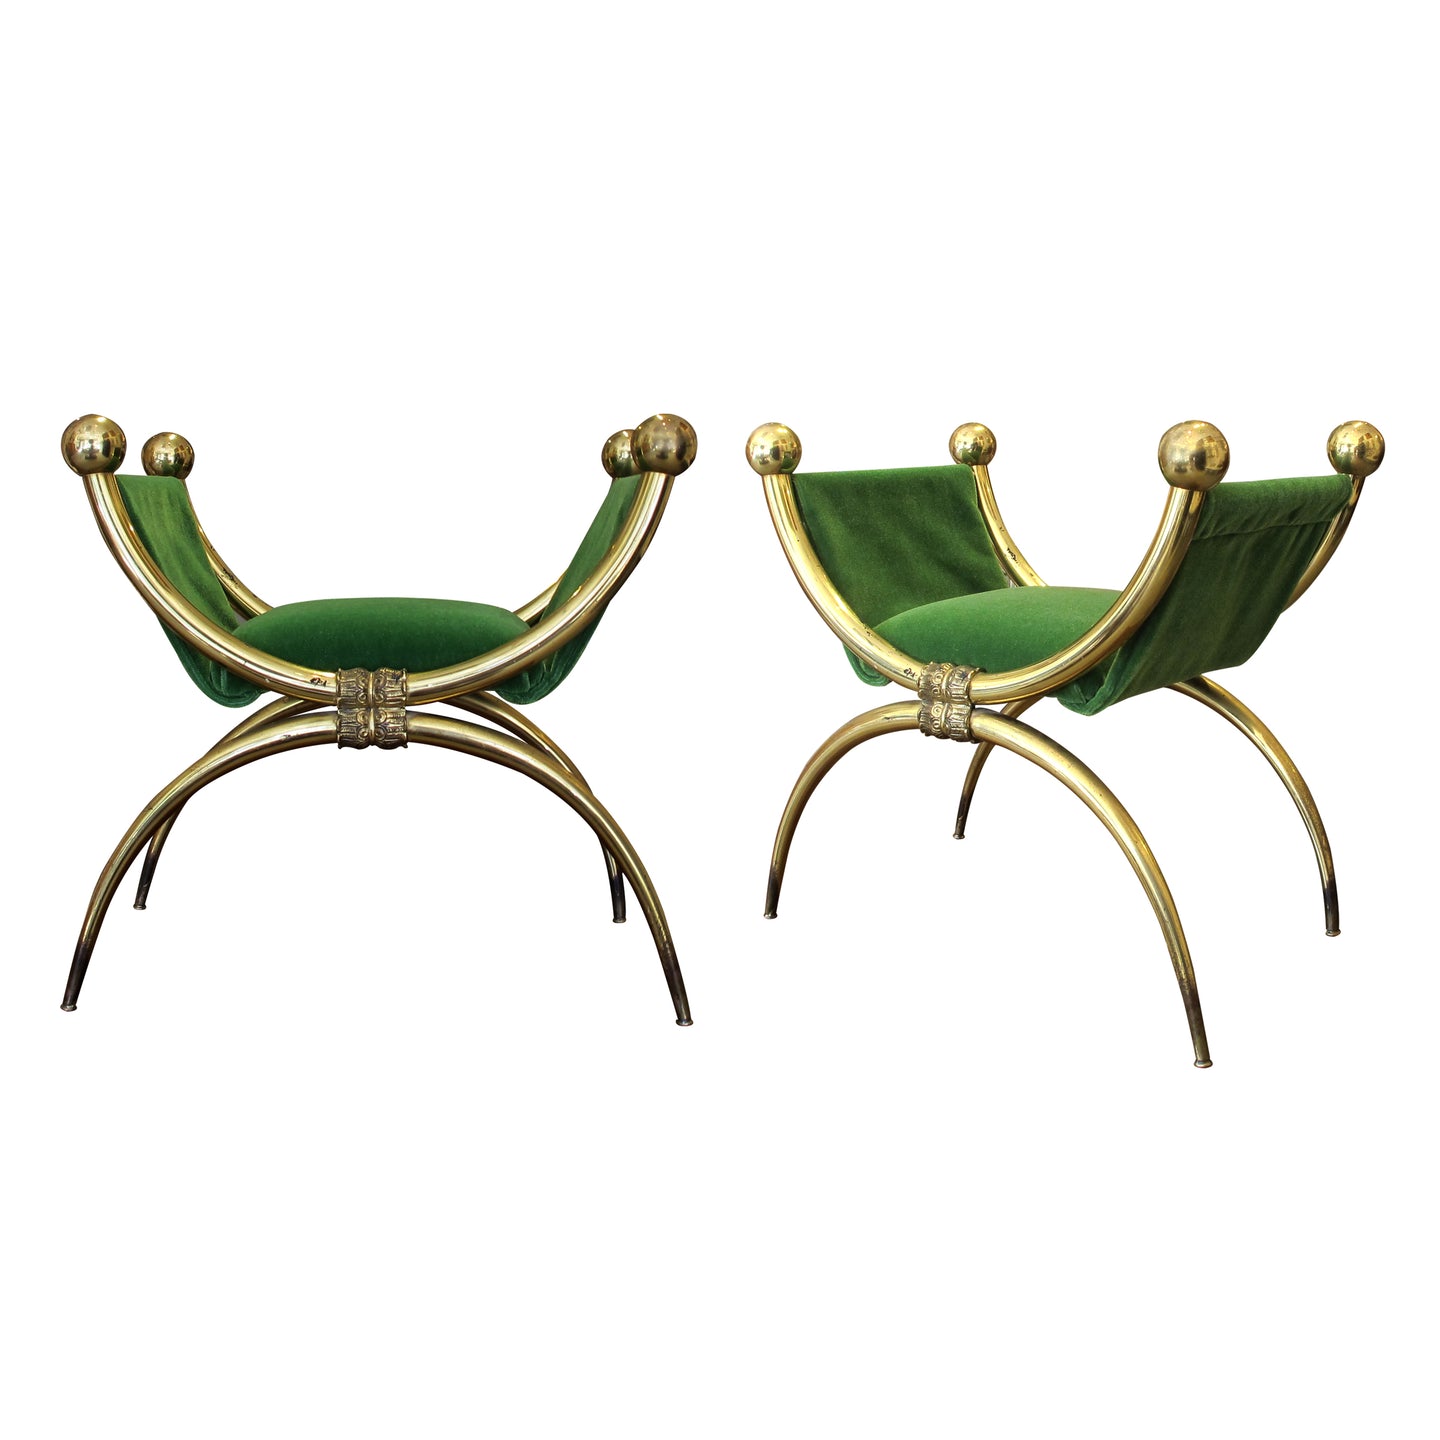 1940s/50s Italian Pair of Brass Curule Stools with Scrolled Legs